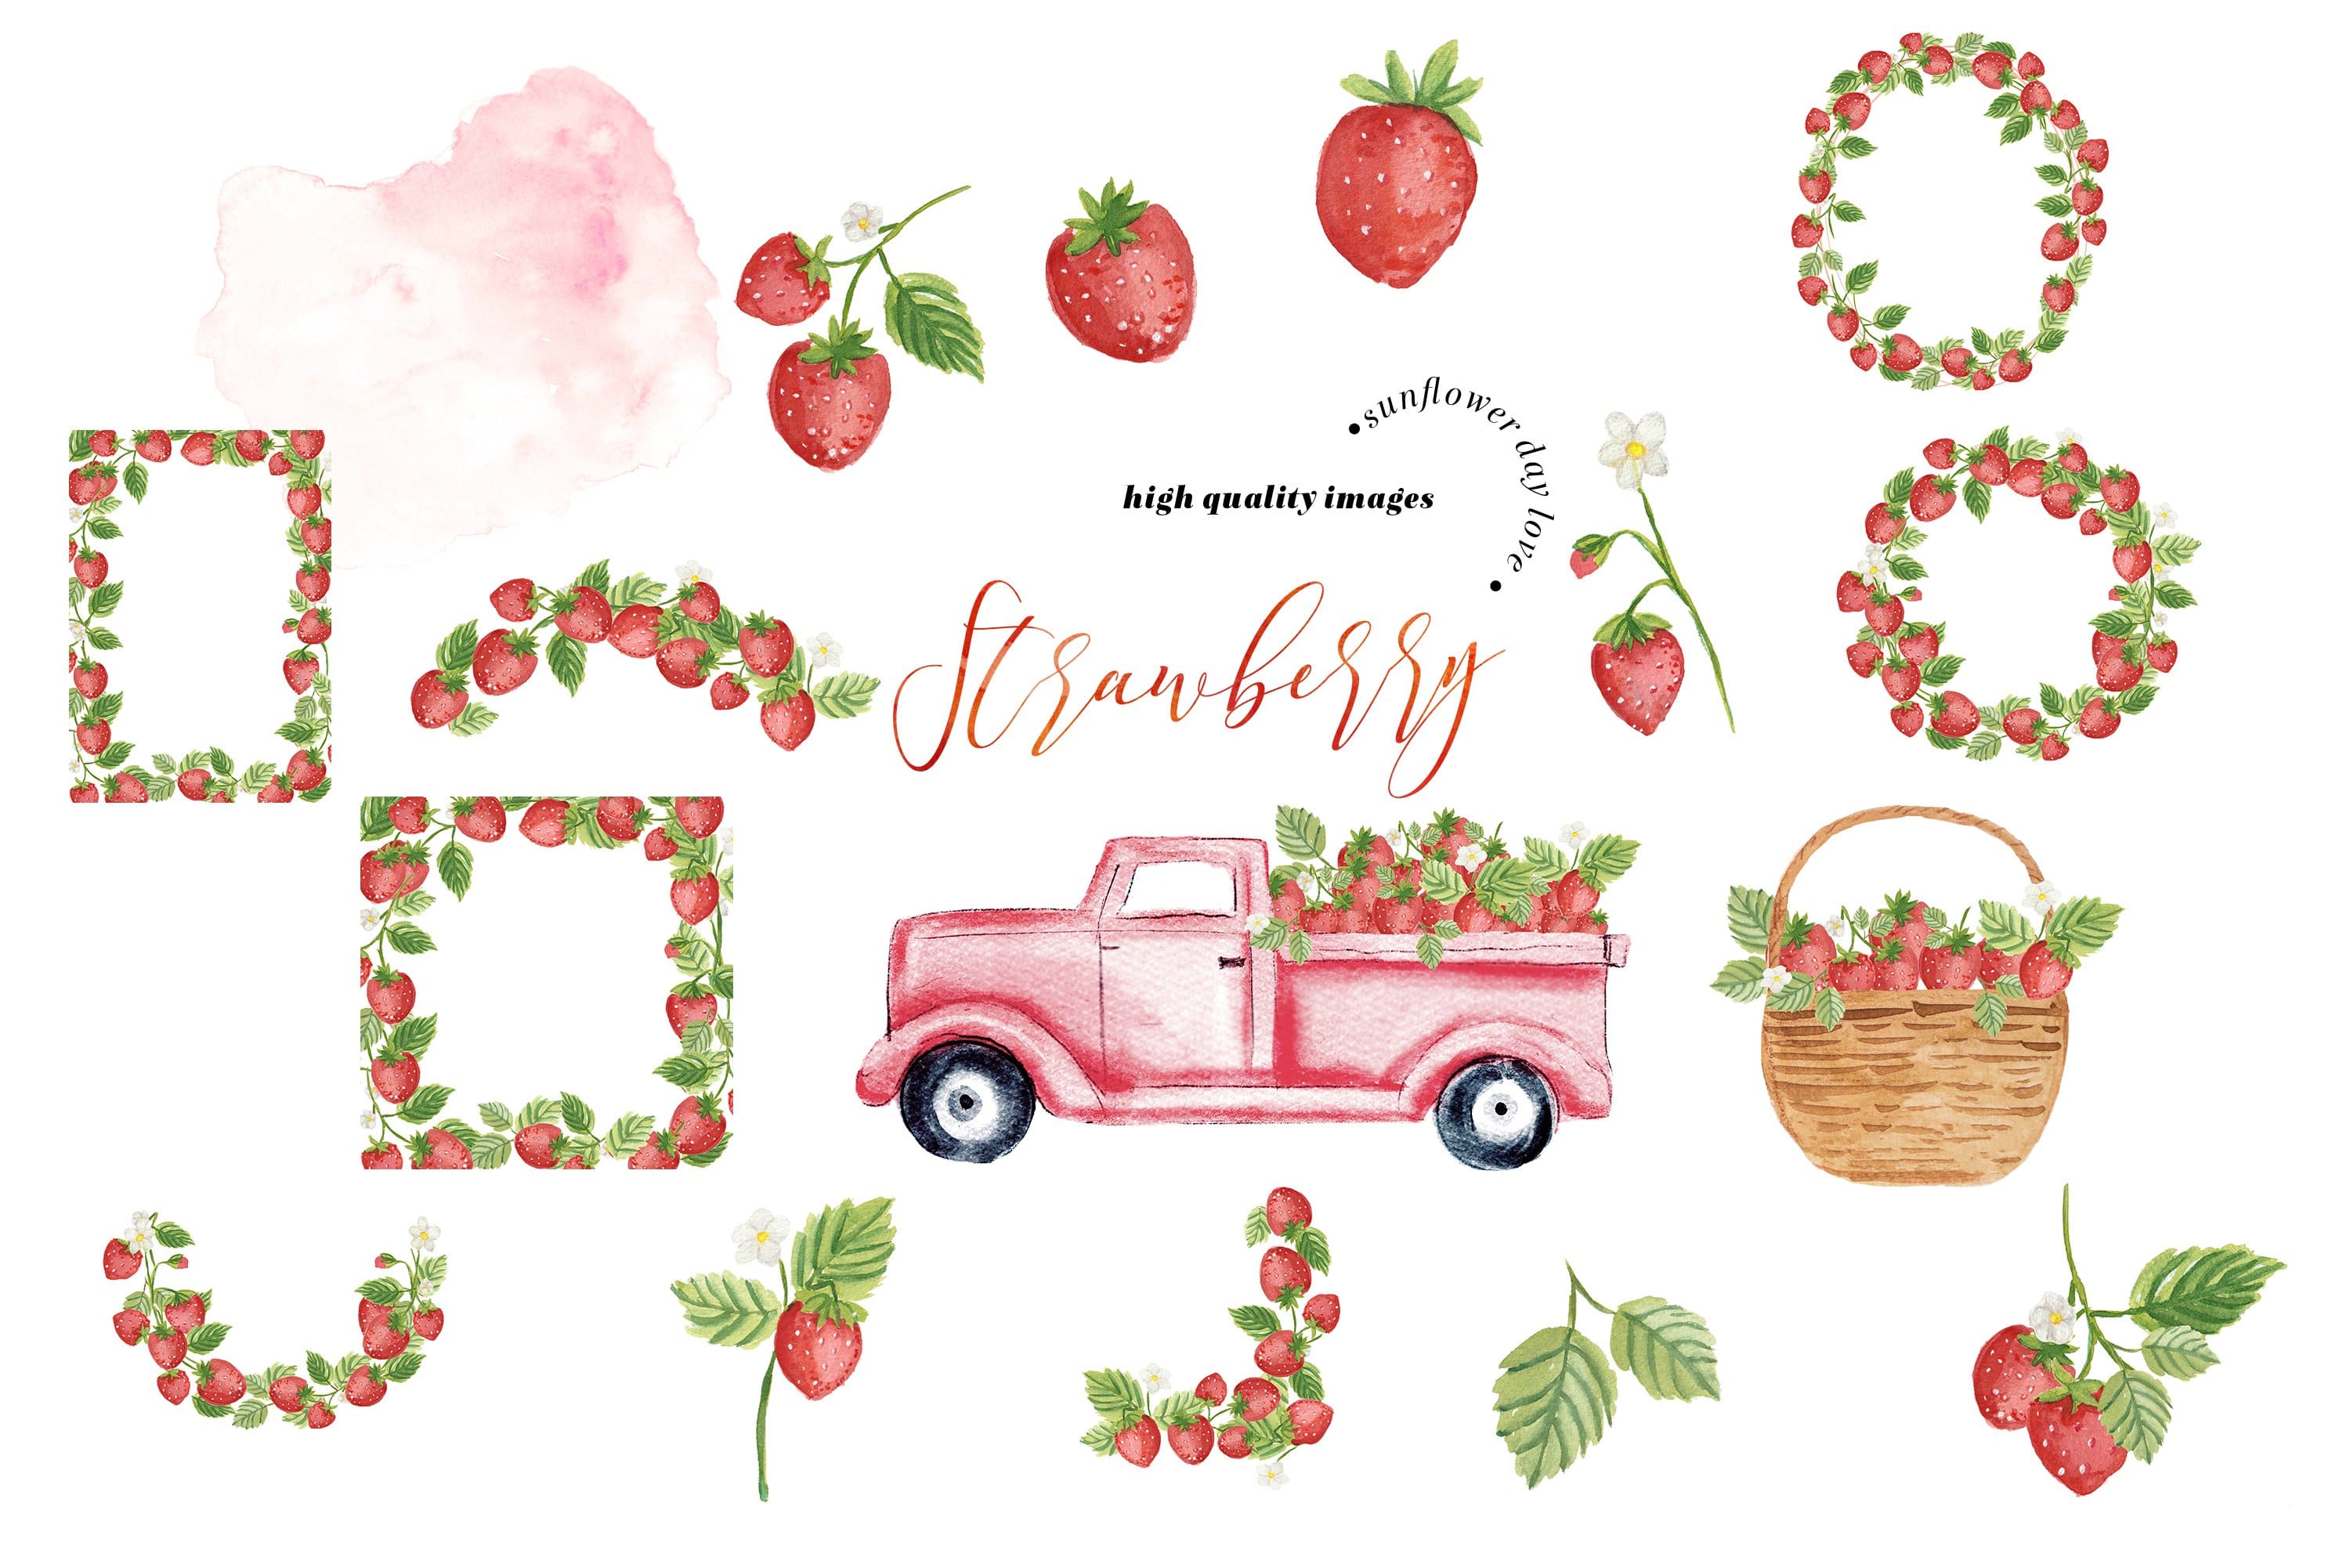 Illustration of a pink pickup truck with strawberries inside.